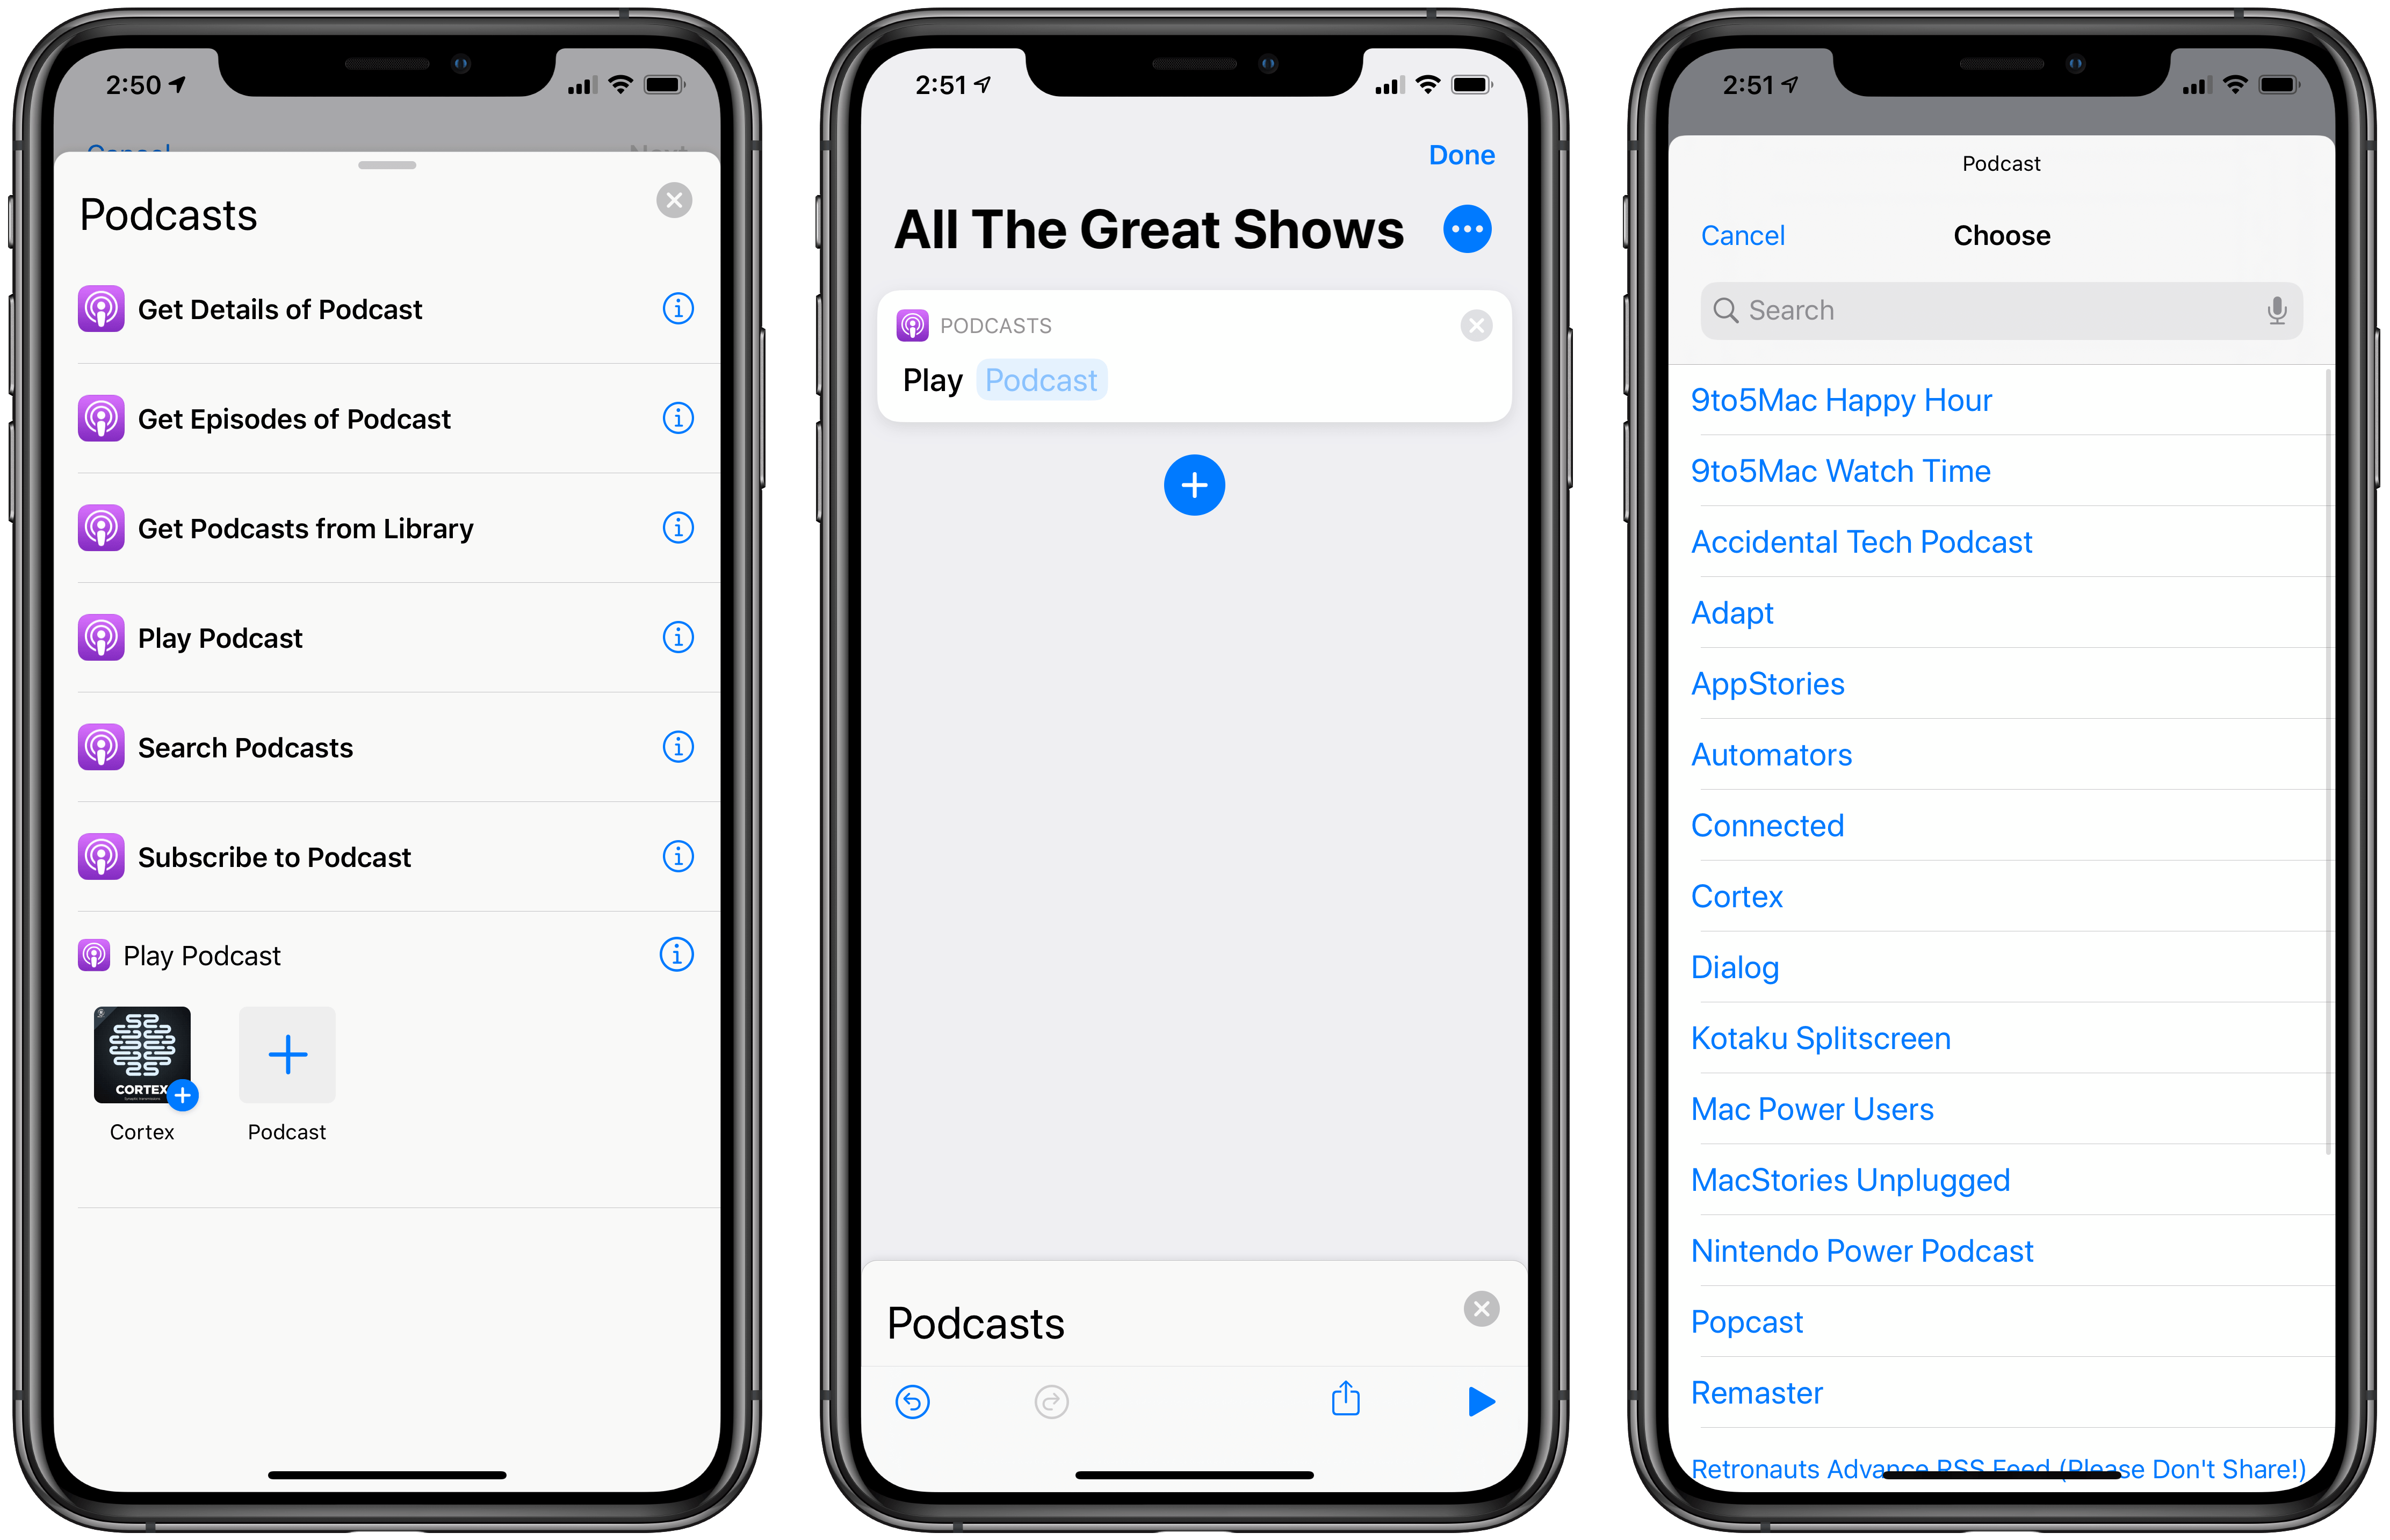 Playing a podcast in Shortcuts for iOS 13 is as easy as adding a single action and picking the show as a parameter from a pre-populated list.